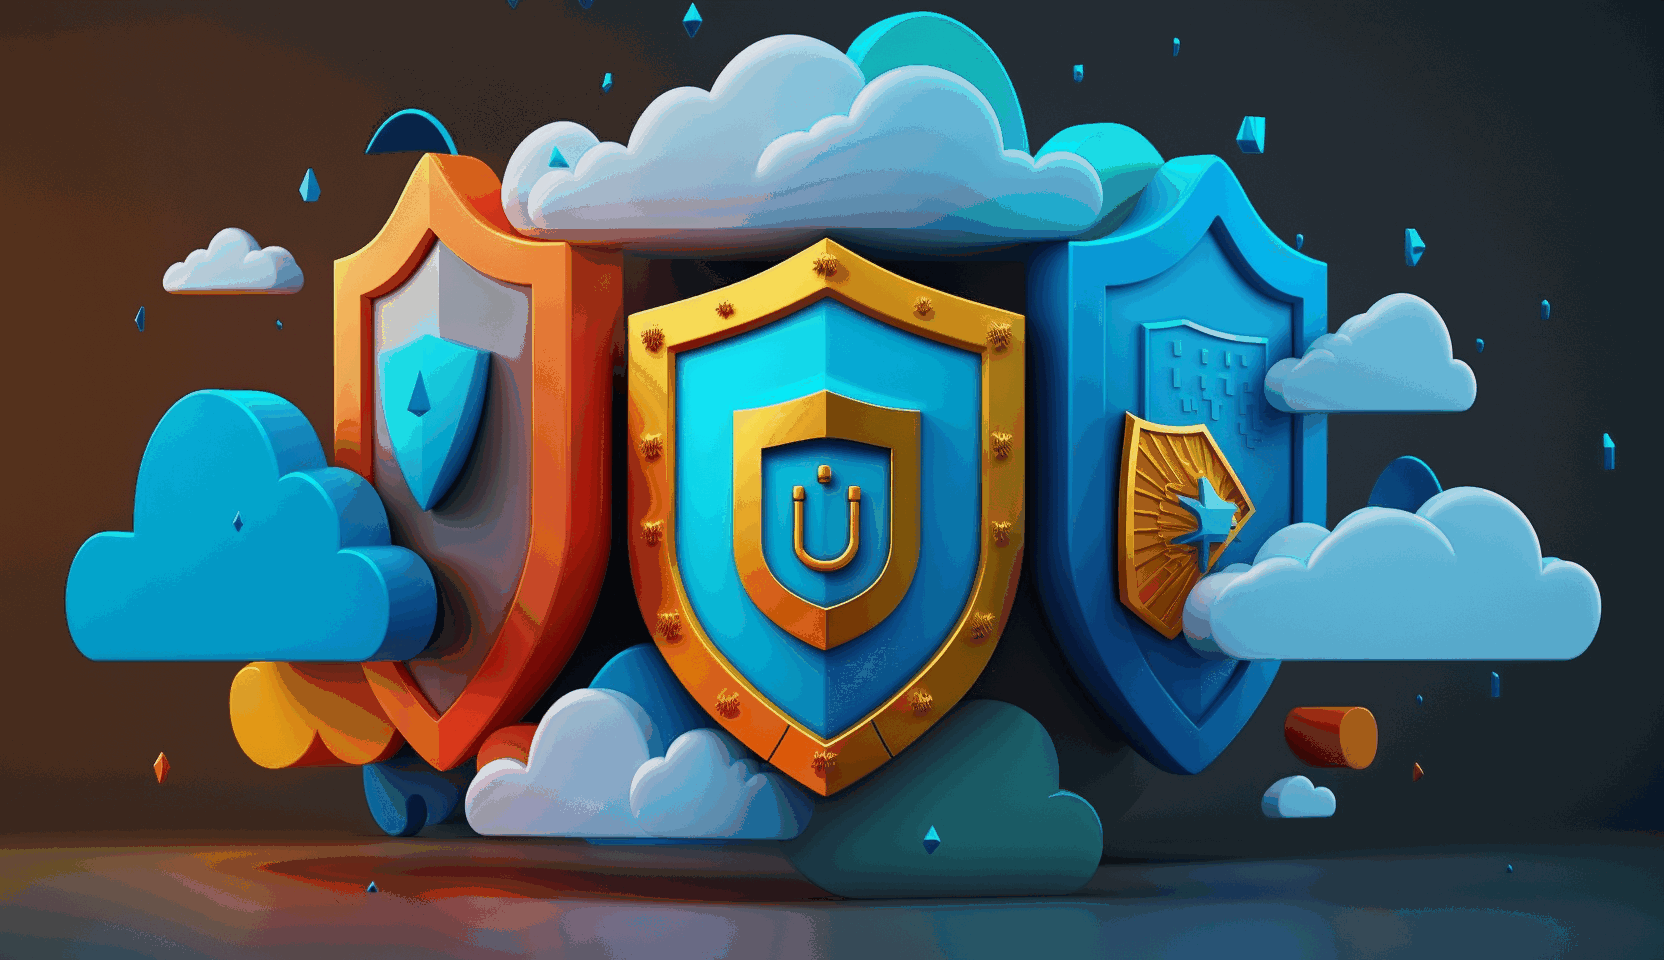 A vibrant, 3D animated image showcasing three distinct cloud structures representing AWS, Azure, and Google Cloud Platform, with shield symbols overlaying each cloud to symbolize their security offerings.